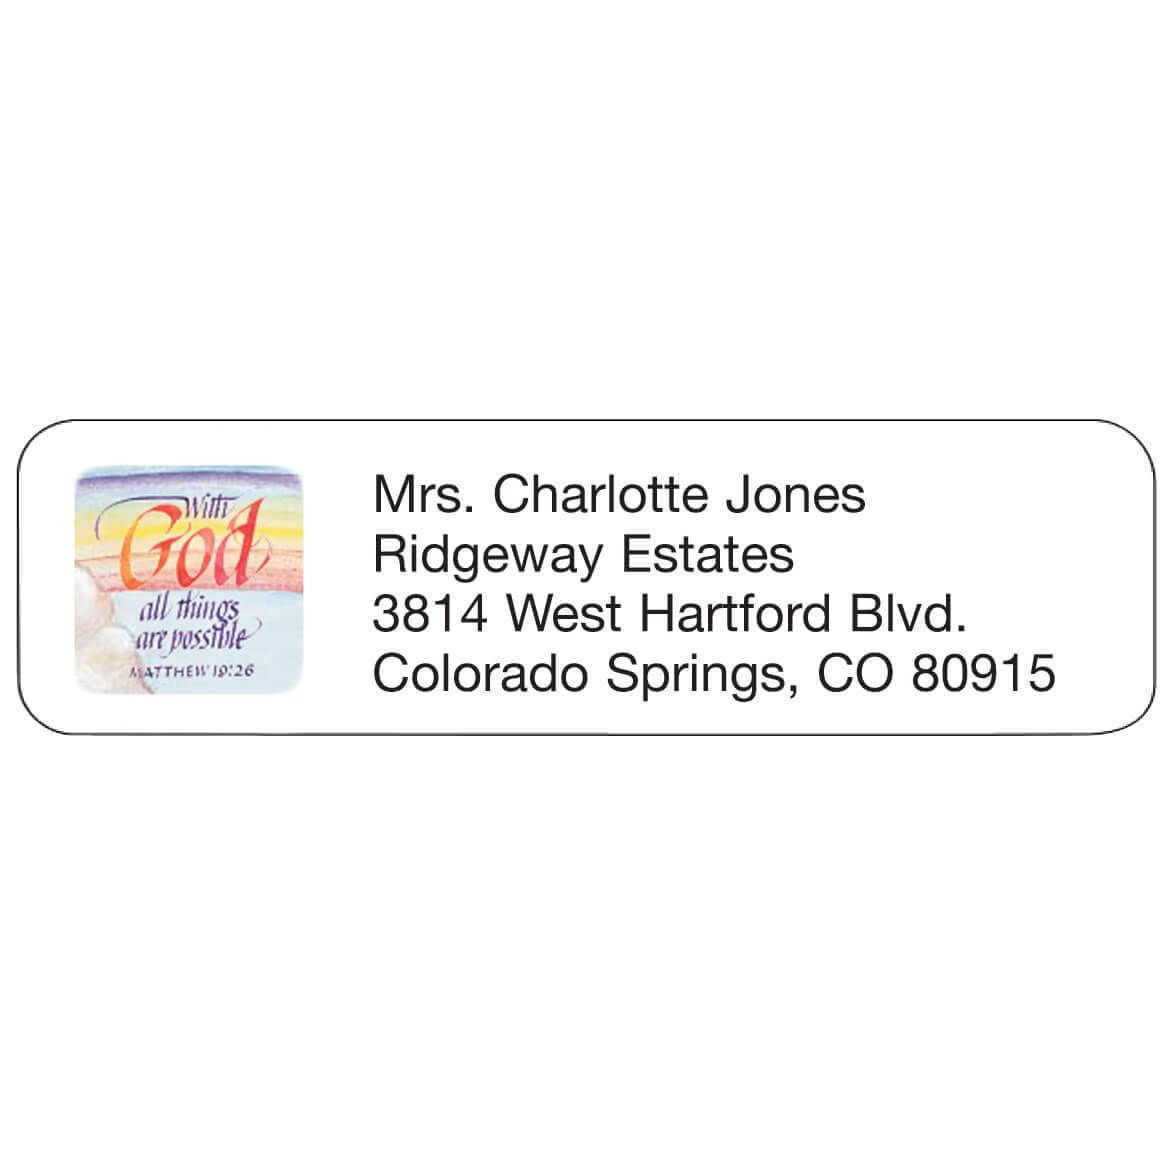 Religious Personalized Address Labels + '-' + 333179